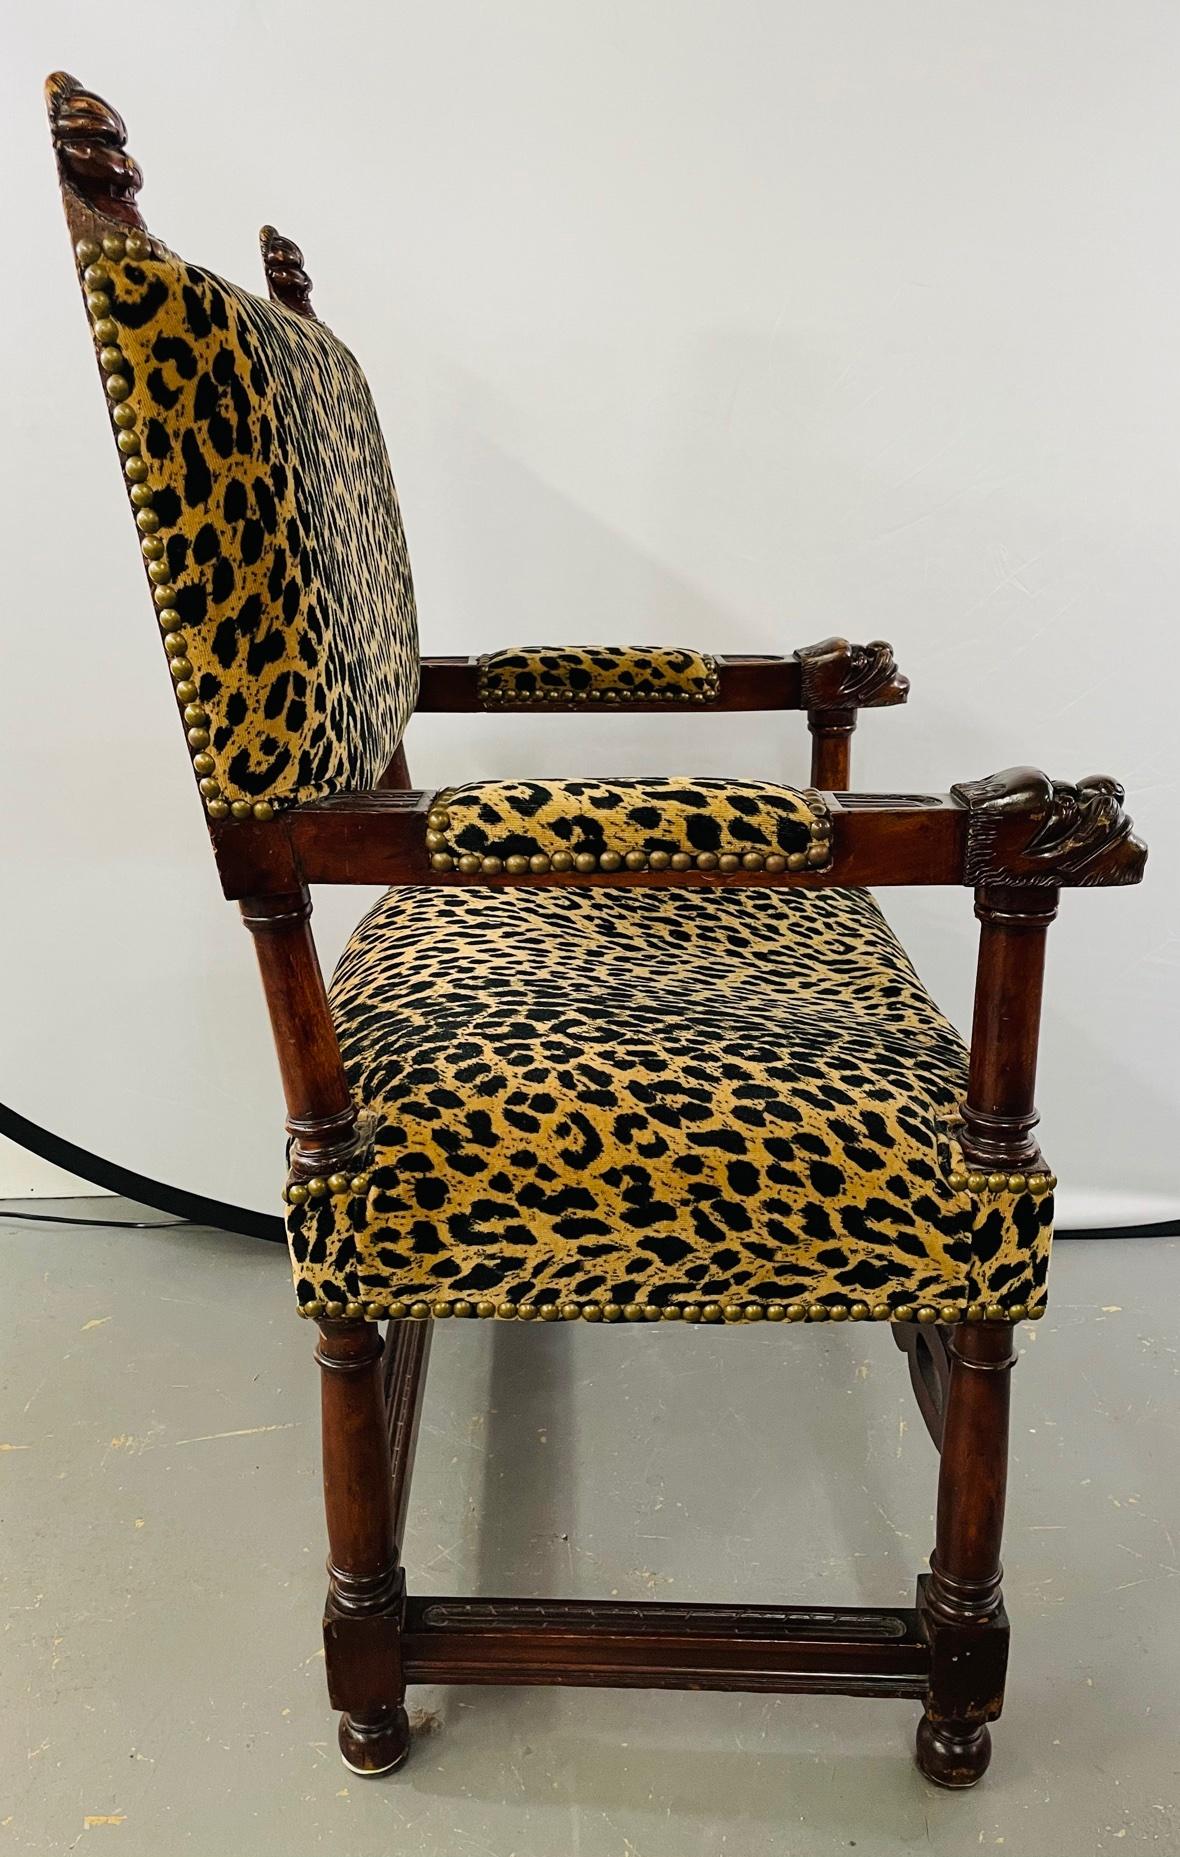 Late 19th Century Victorian Gothic Revival Leopard Upholstery Arm or Side Chair For Sale 9